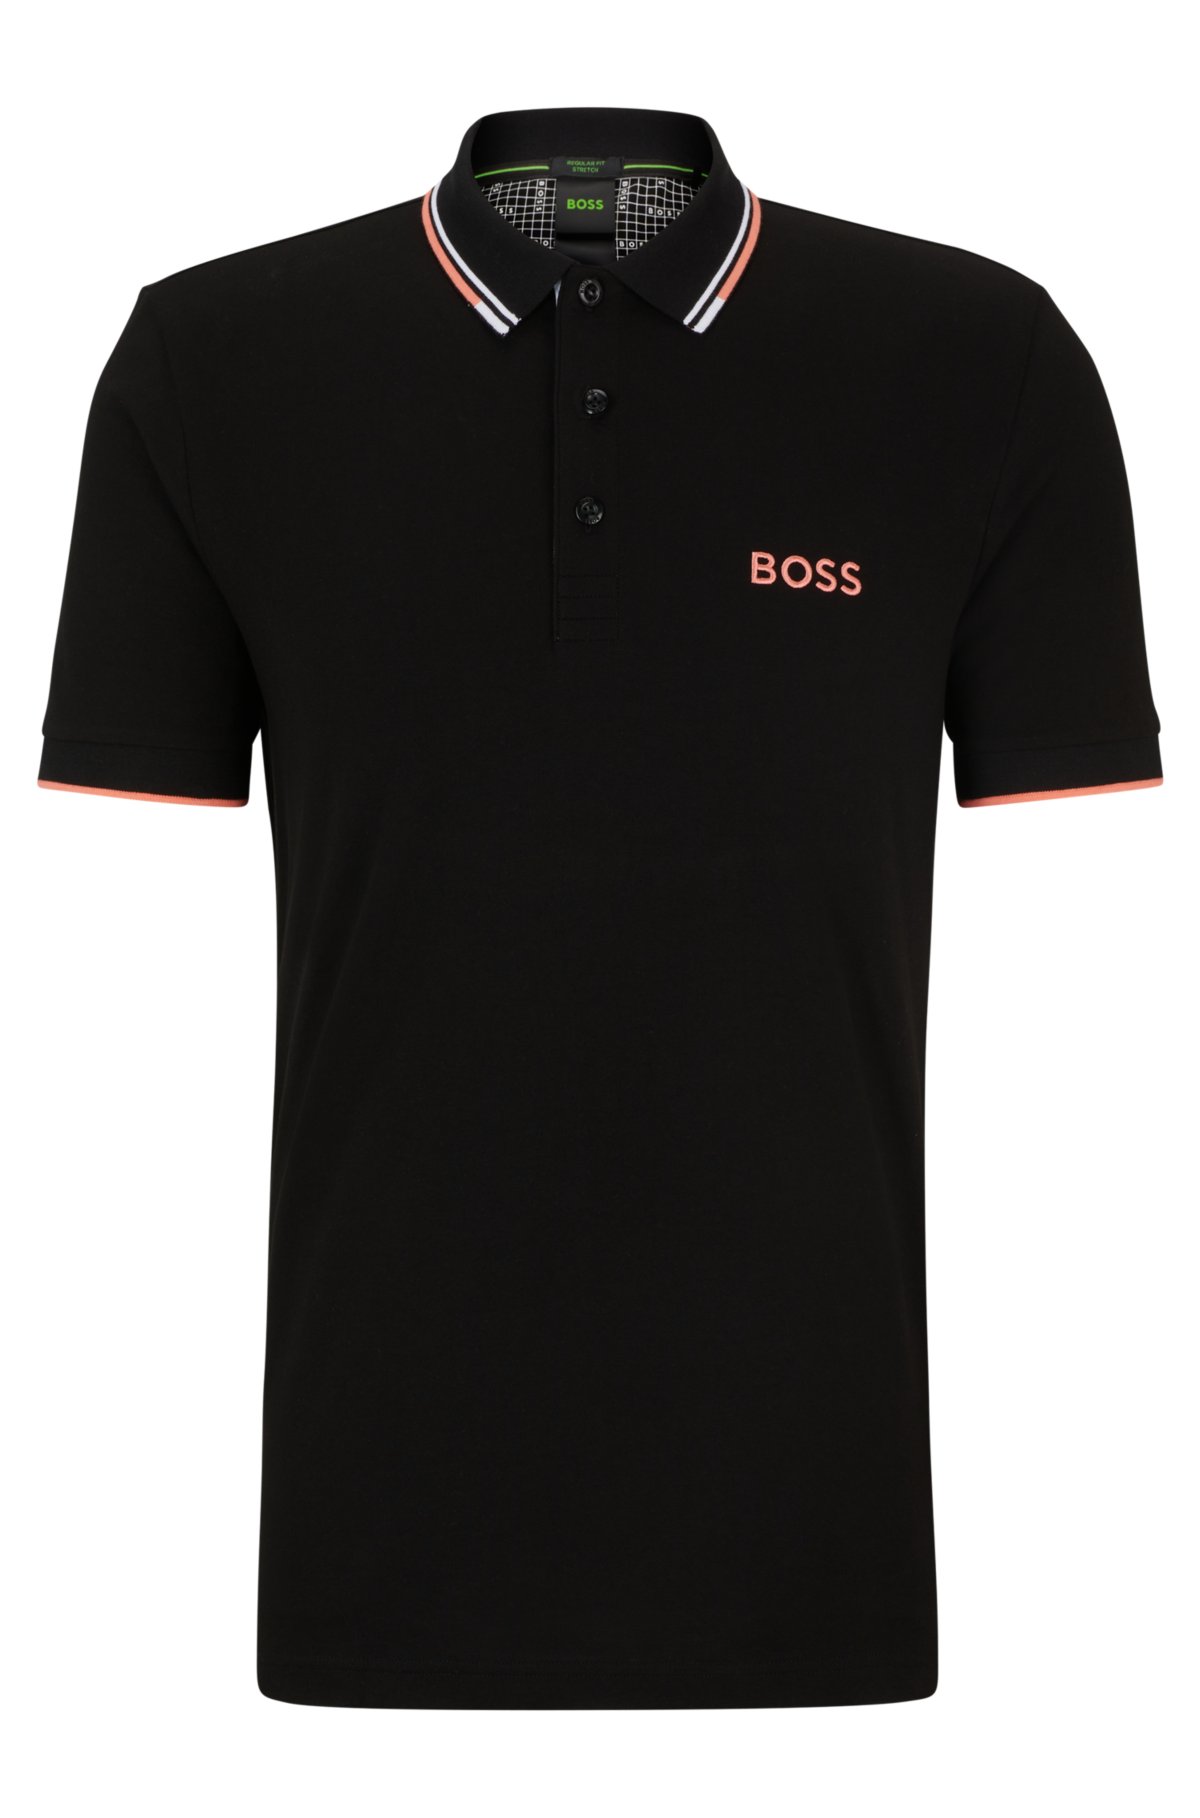 Cotton-blend polo shirt with contrast logos, Black